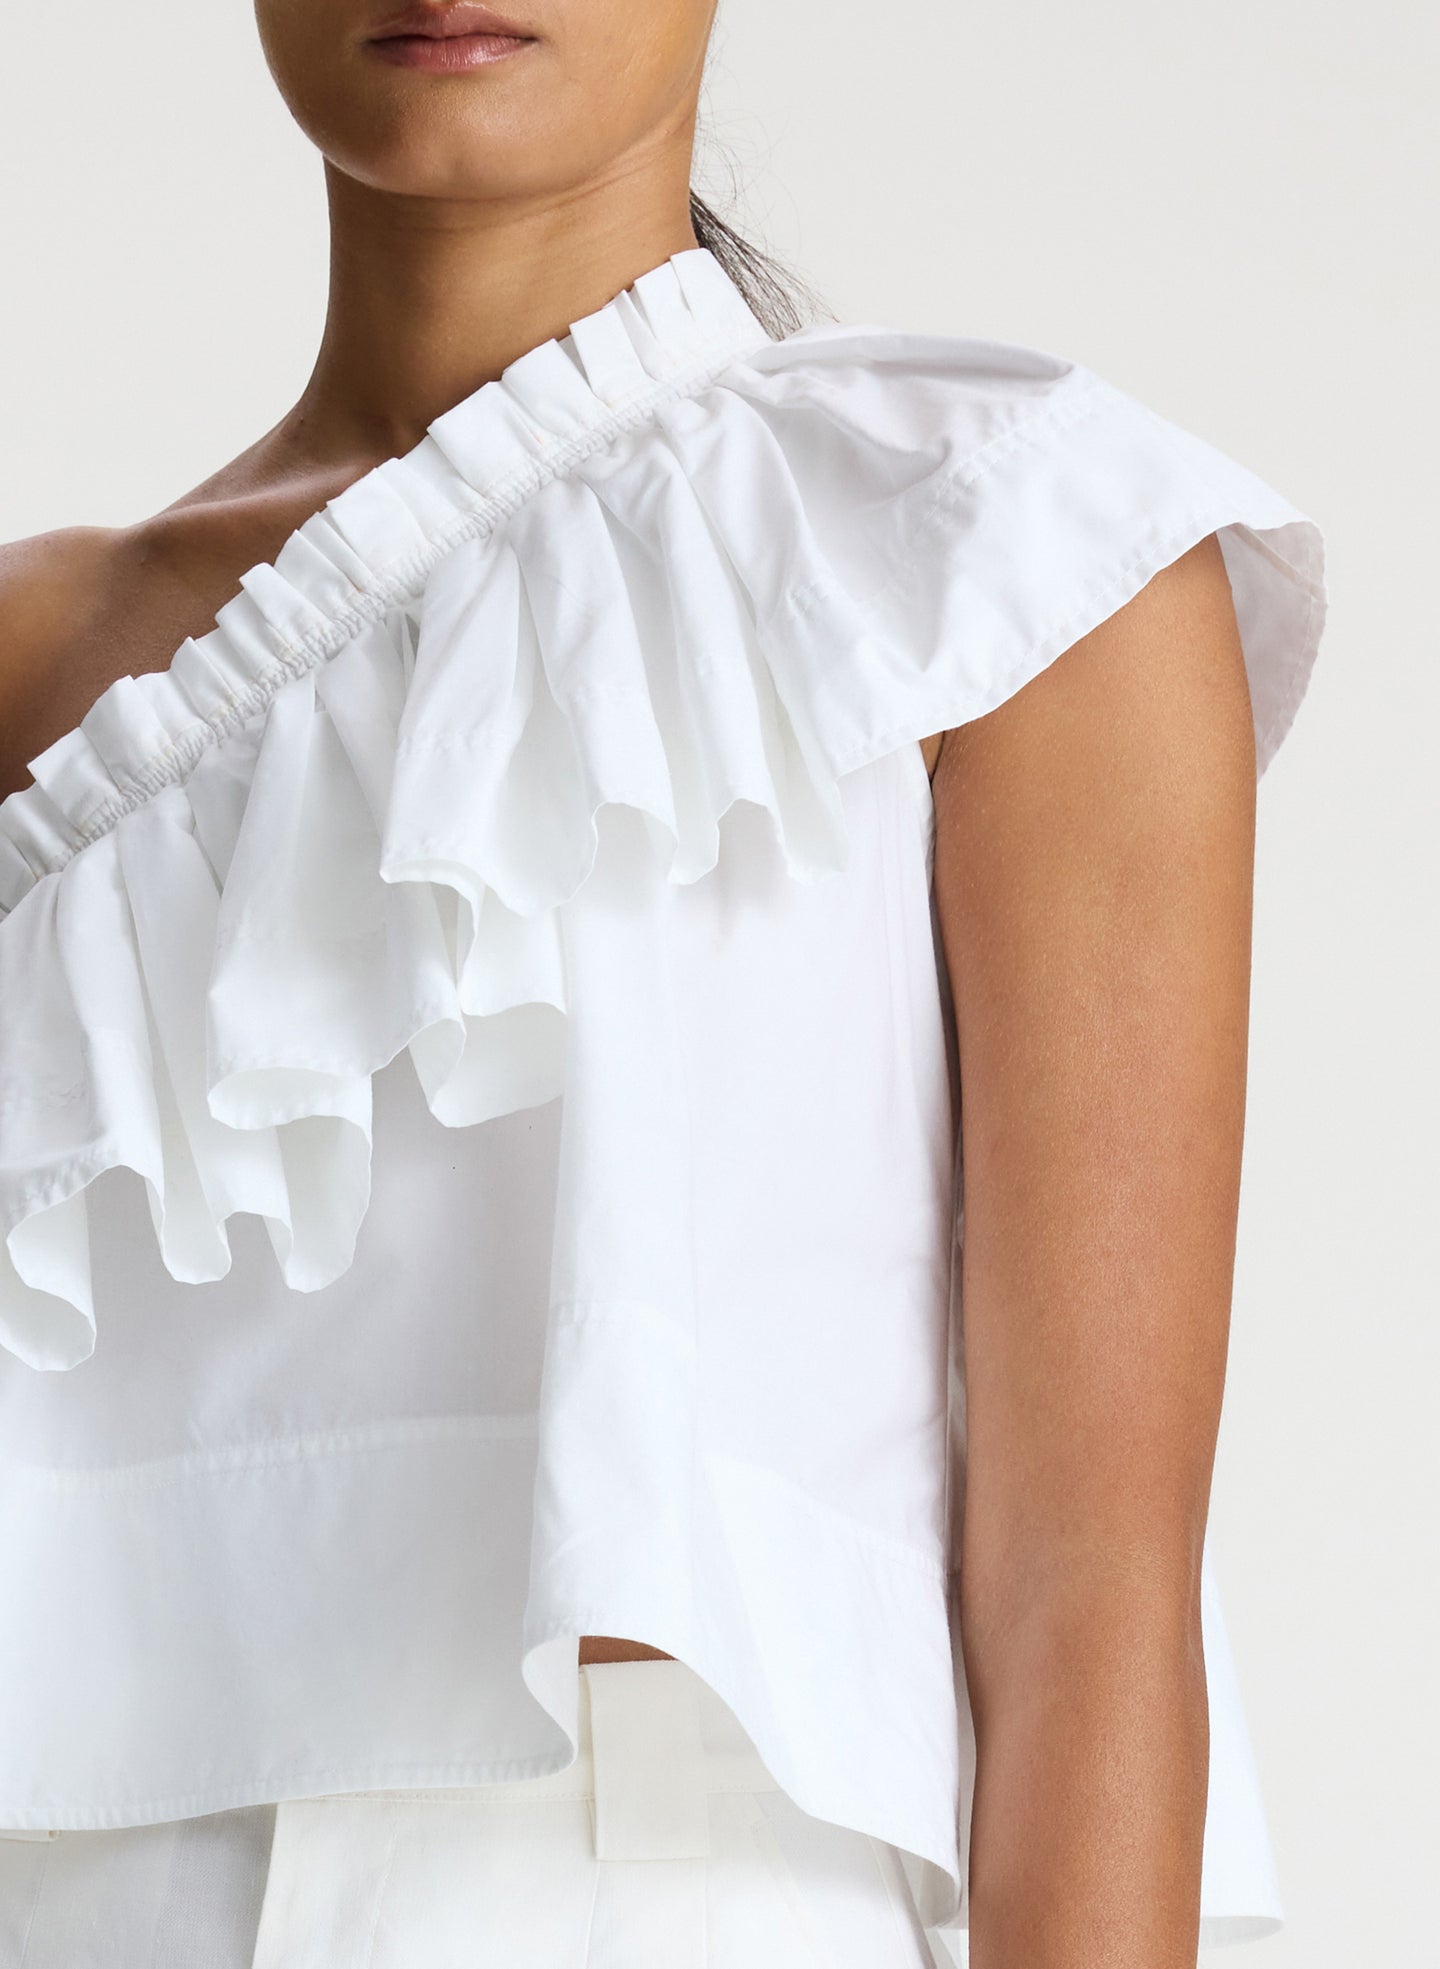 detail view of woman wearing white one shoulder ruffle top and white shorts